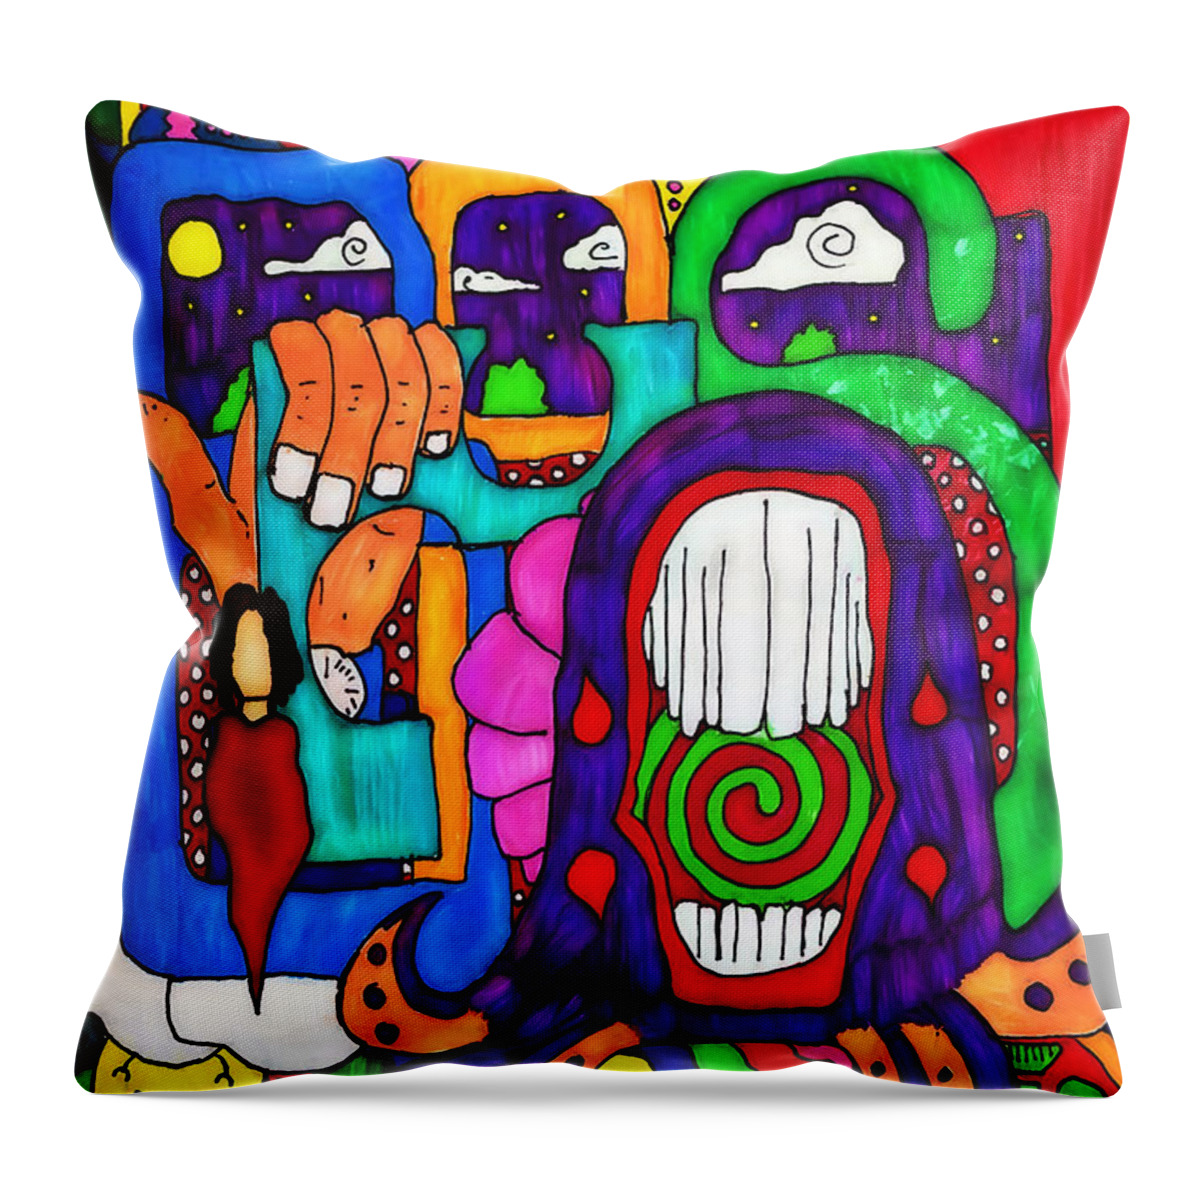 Abstract Throw Pillow featuring the digital art Basic by Pennie McCracken